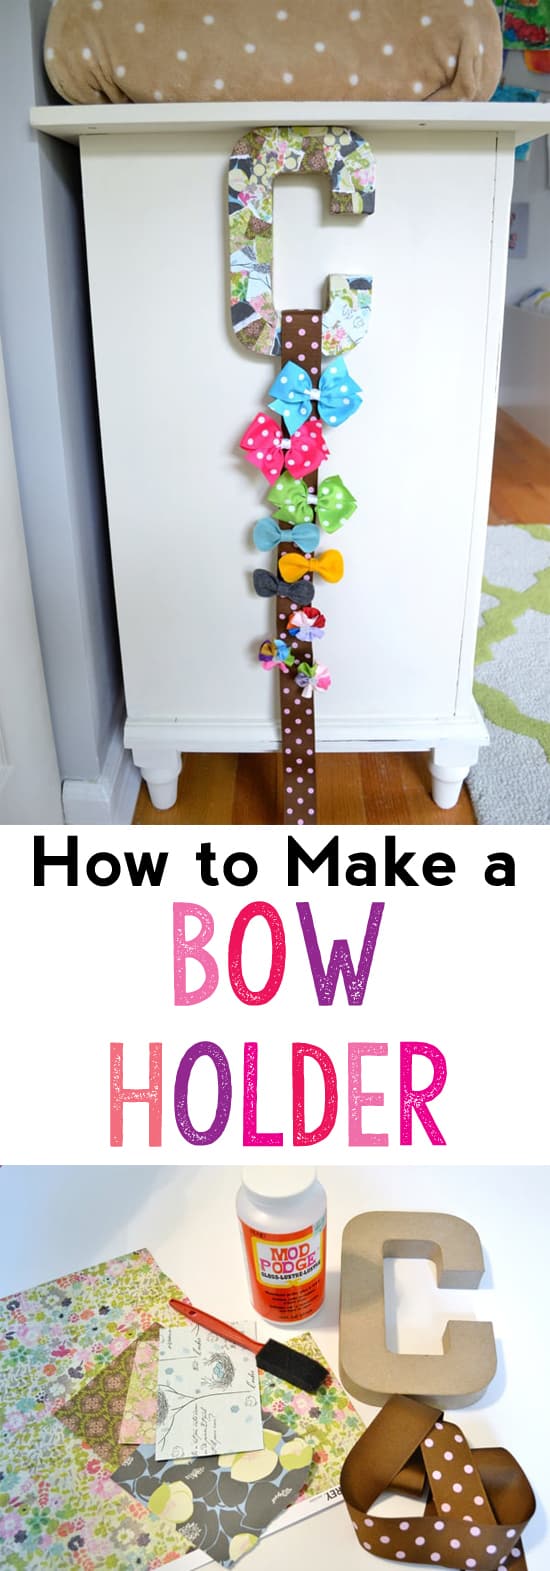 How to Make a Bow Holder